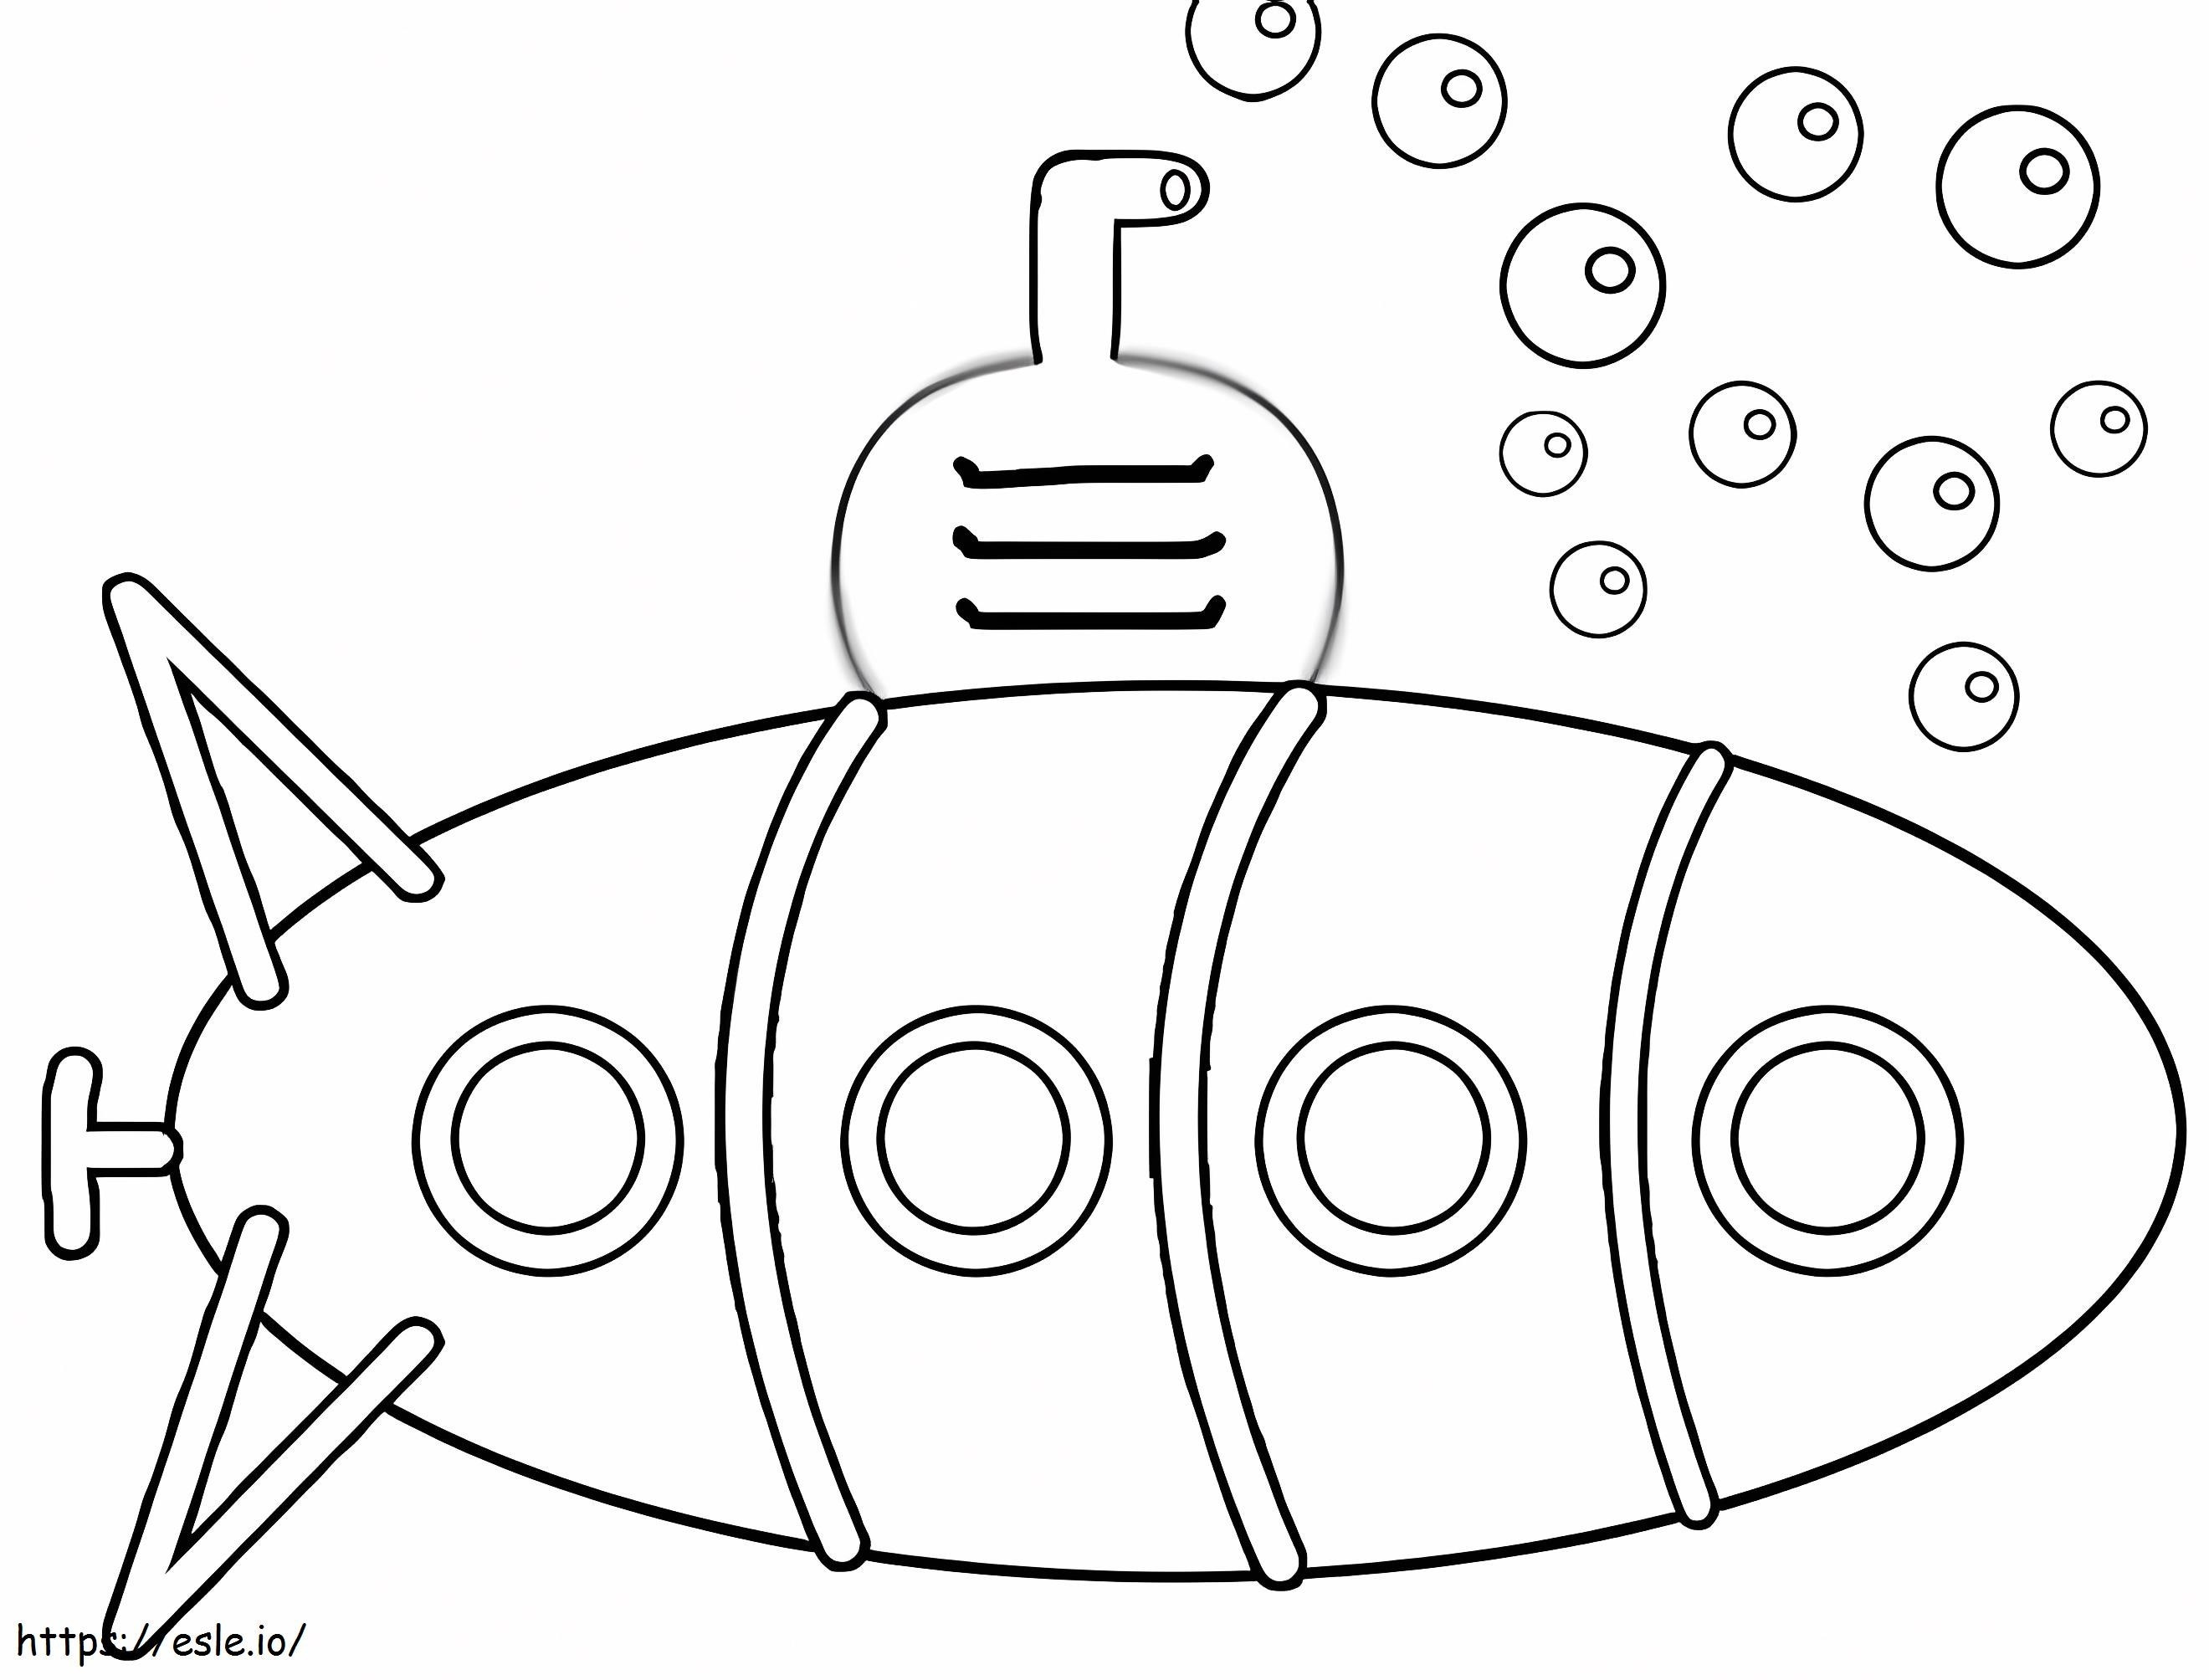 Submarine And Water Bubbles coloring page